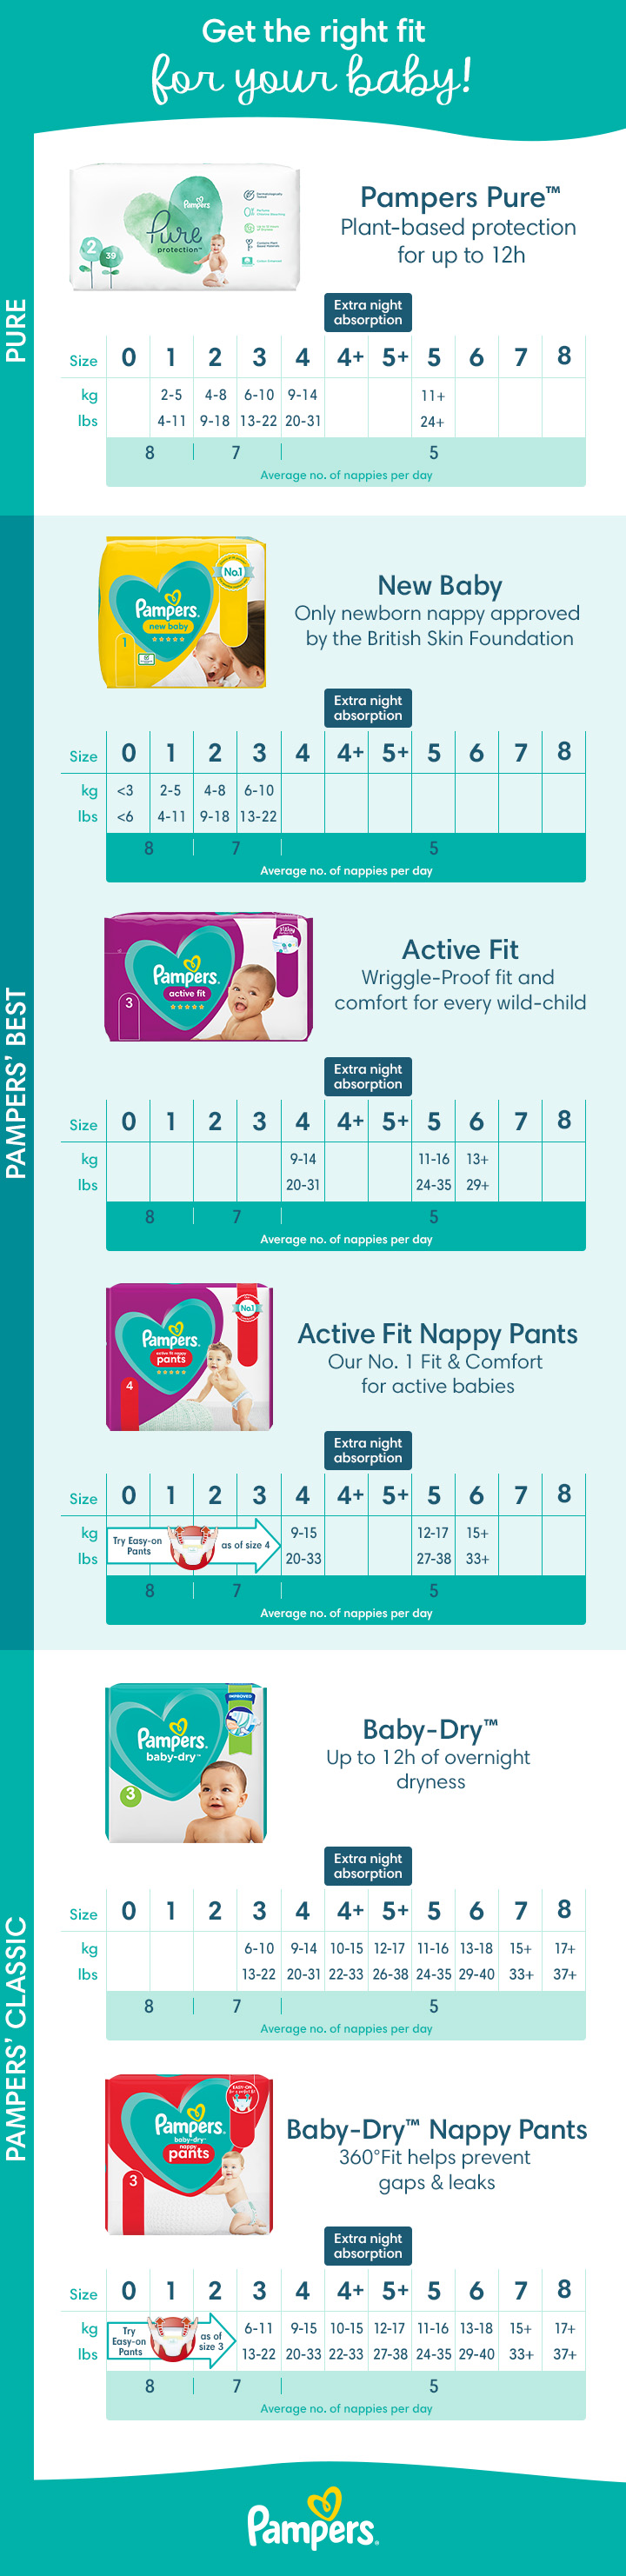 pampers sizes uk